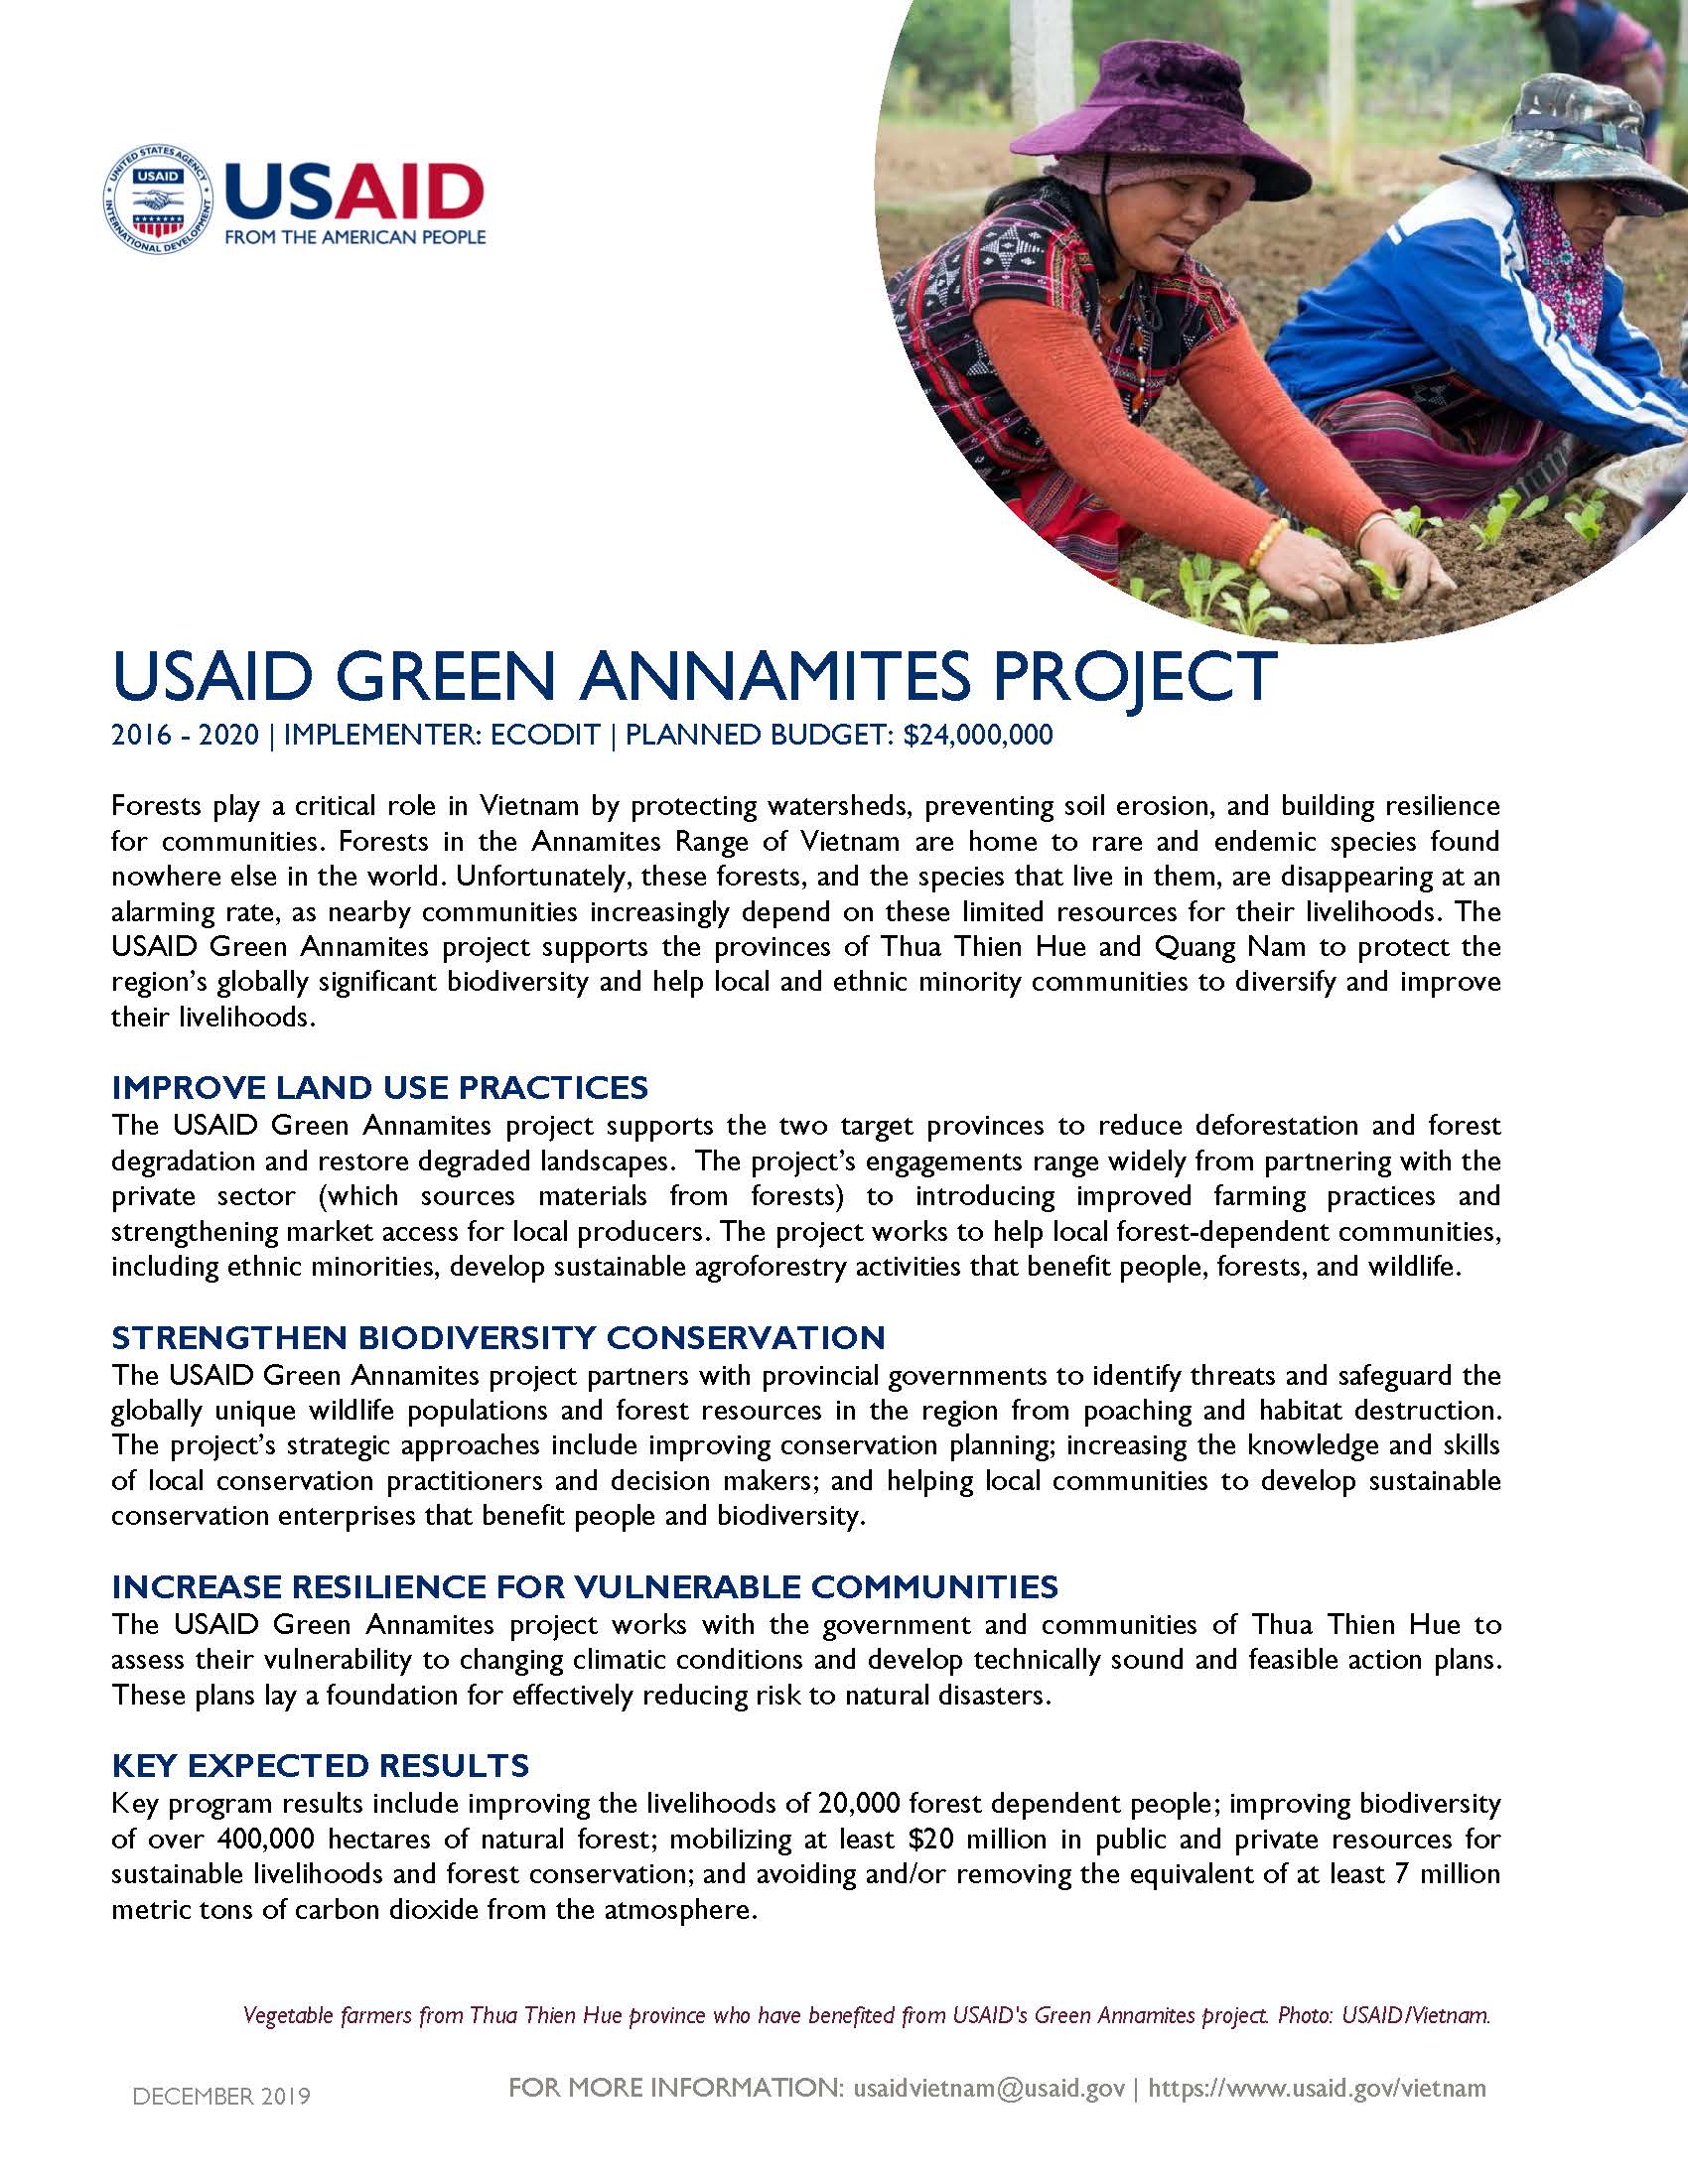 Fact sheet: USAID Green Annamites project